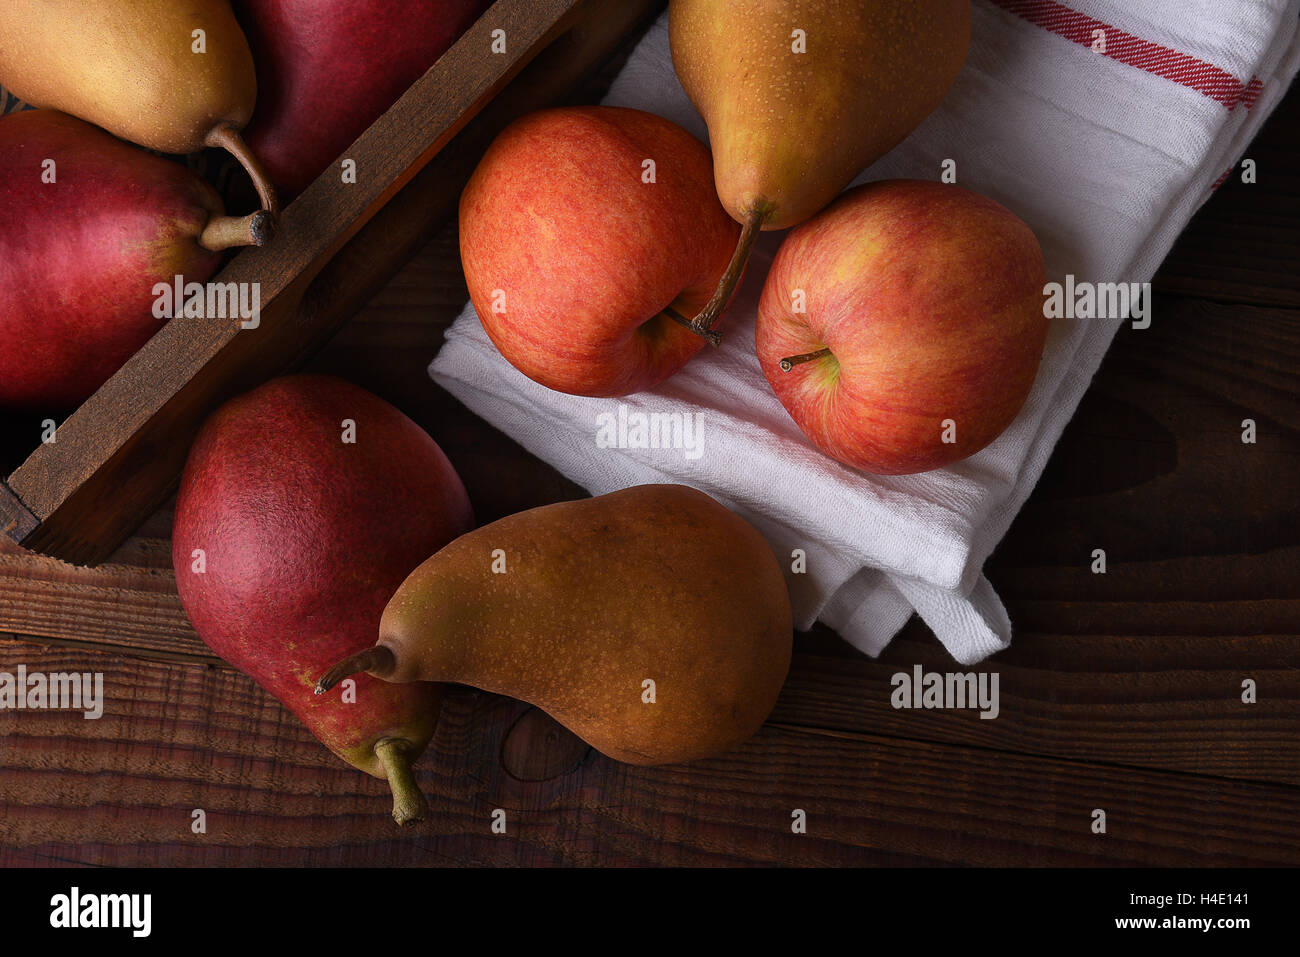 Fresh picked pears and apples in a wood crate and towel on a rustic wood table. Top view in horizontal format. Stock Photo